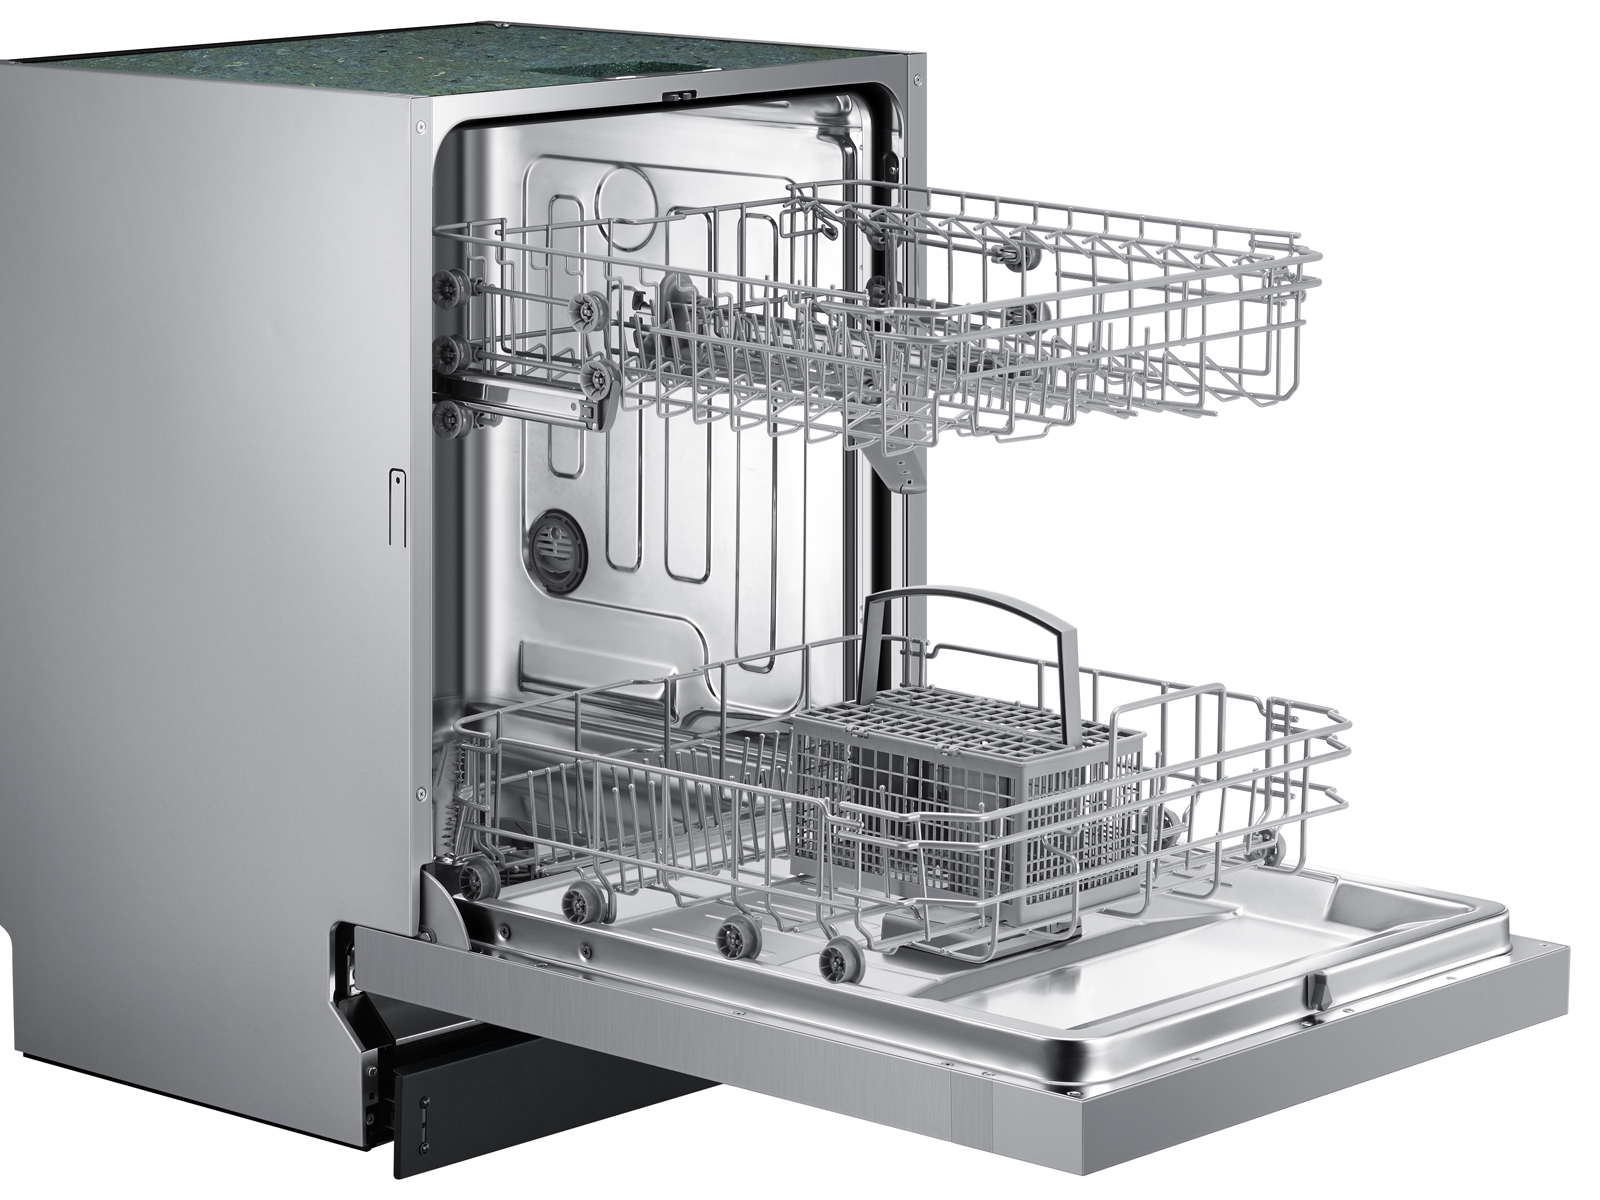 Thumbnail image of Front Control 52 dBA ADA Dishwasher in Stainless Steel